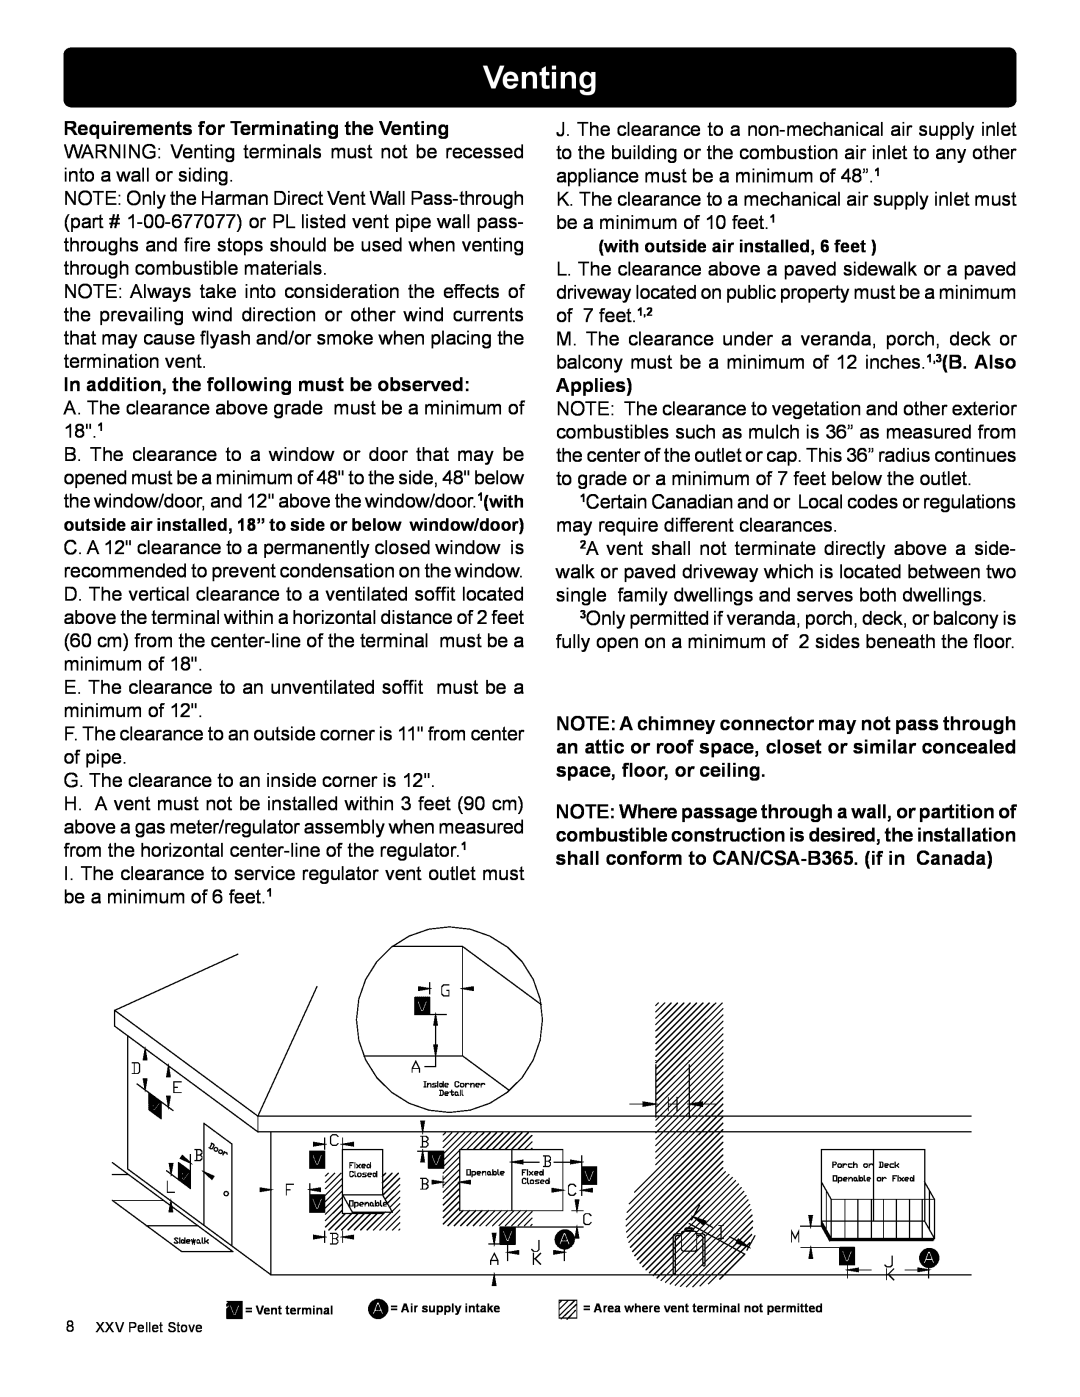 Harman Stove Company R16 manual Venting, In addition, the following must be observed, Applies 